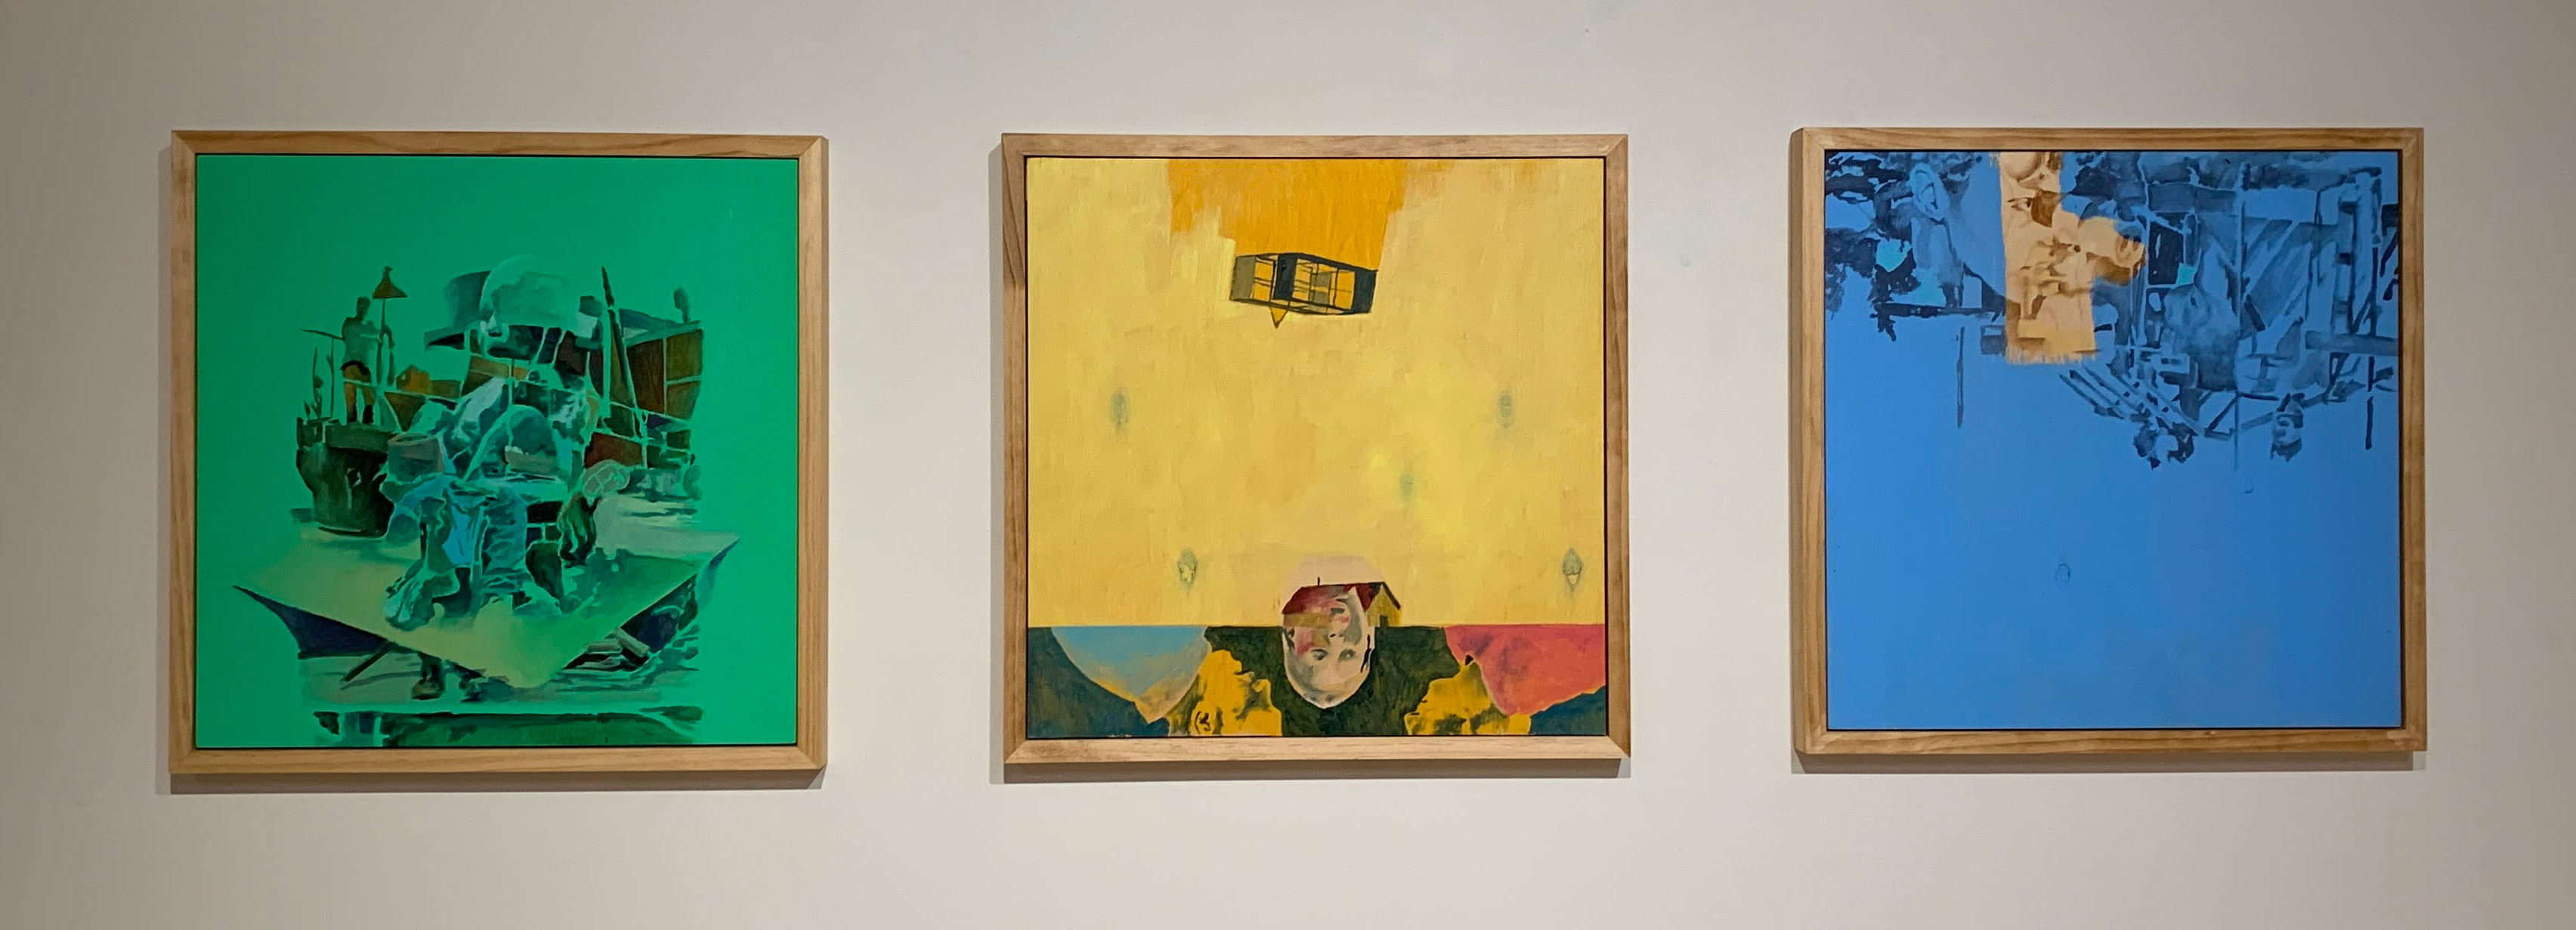 three paintings hung side by side, the first is predominately green with a fractured image of a child on a floating vessel, the second is predominately yellow with a box kite floating high above a house on a plain, superimposed over the house and land are three upside down portraits, the third is predominately blue and features the image of a young person peering through a scope, they are amidst a clutter of metal beams.